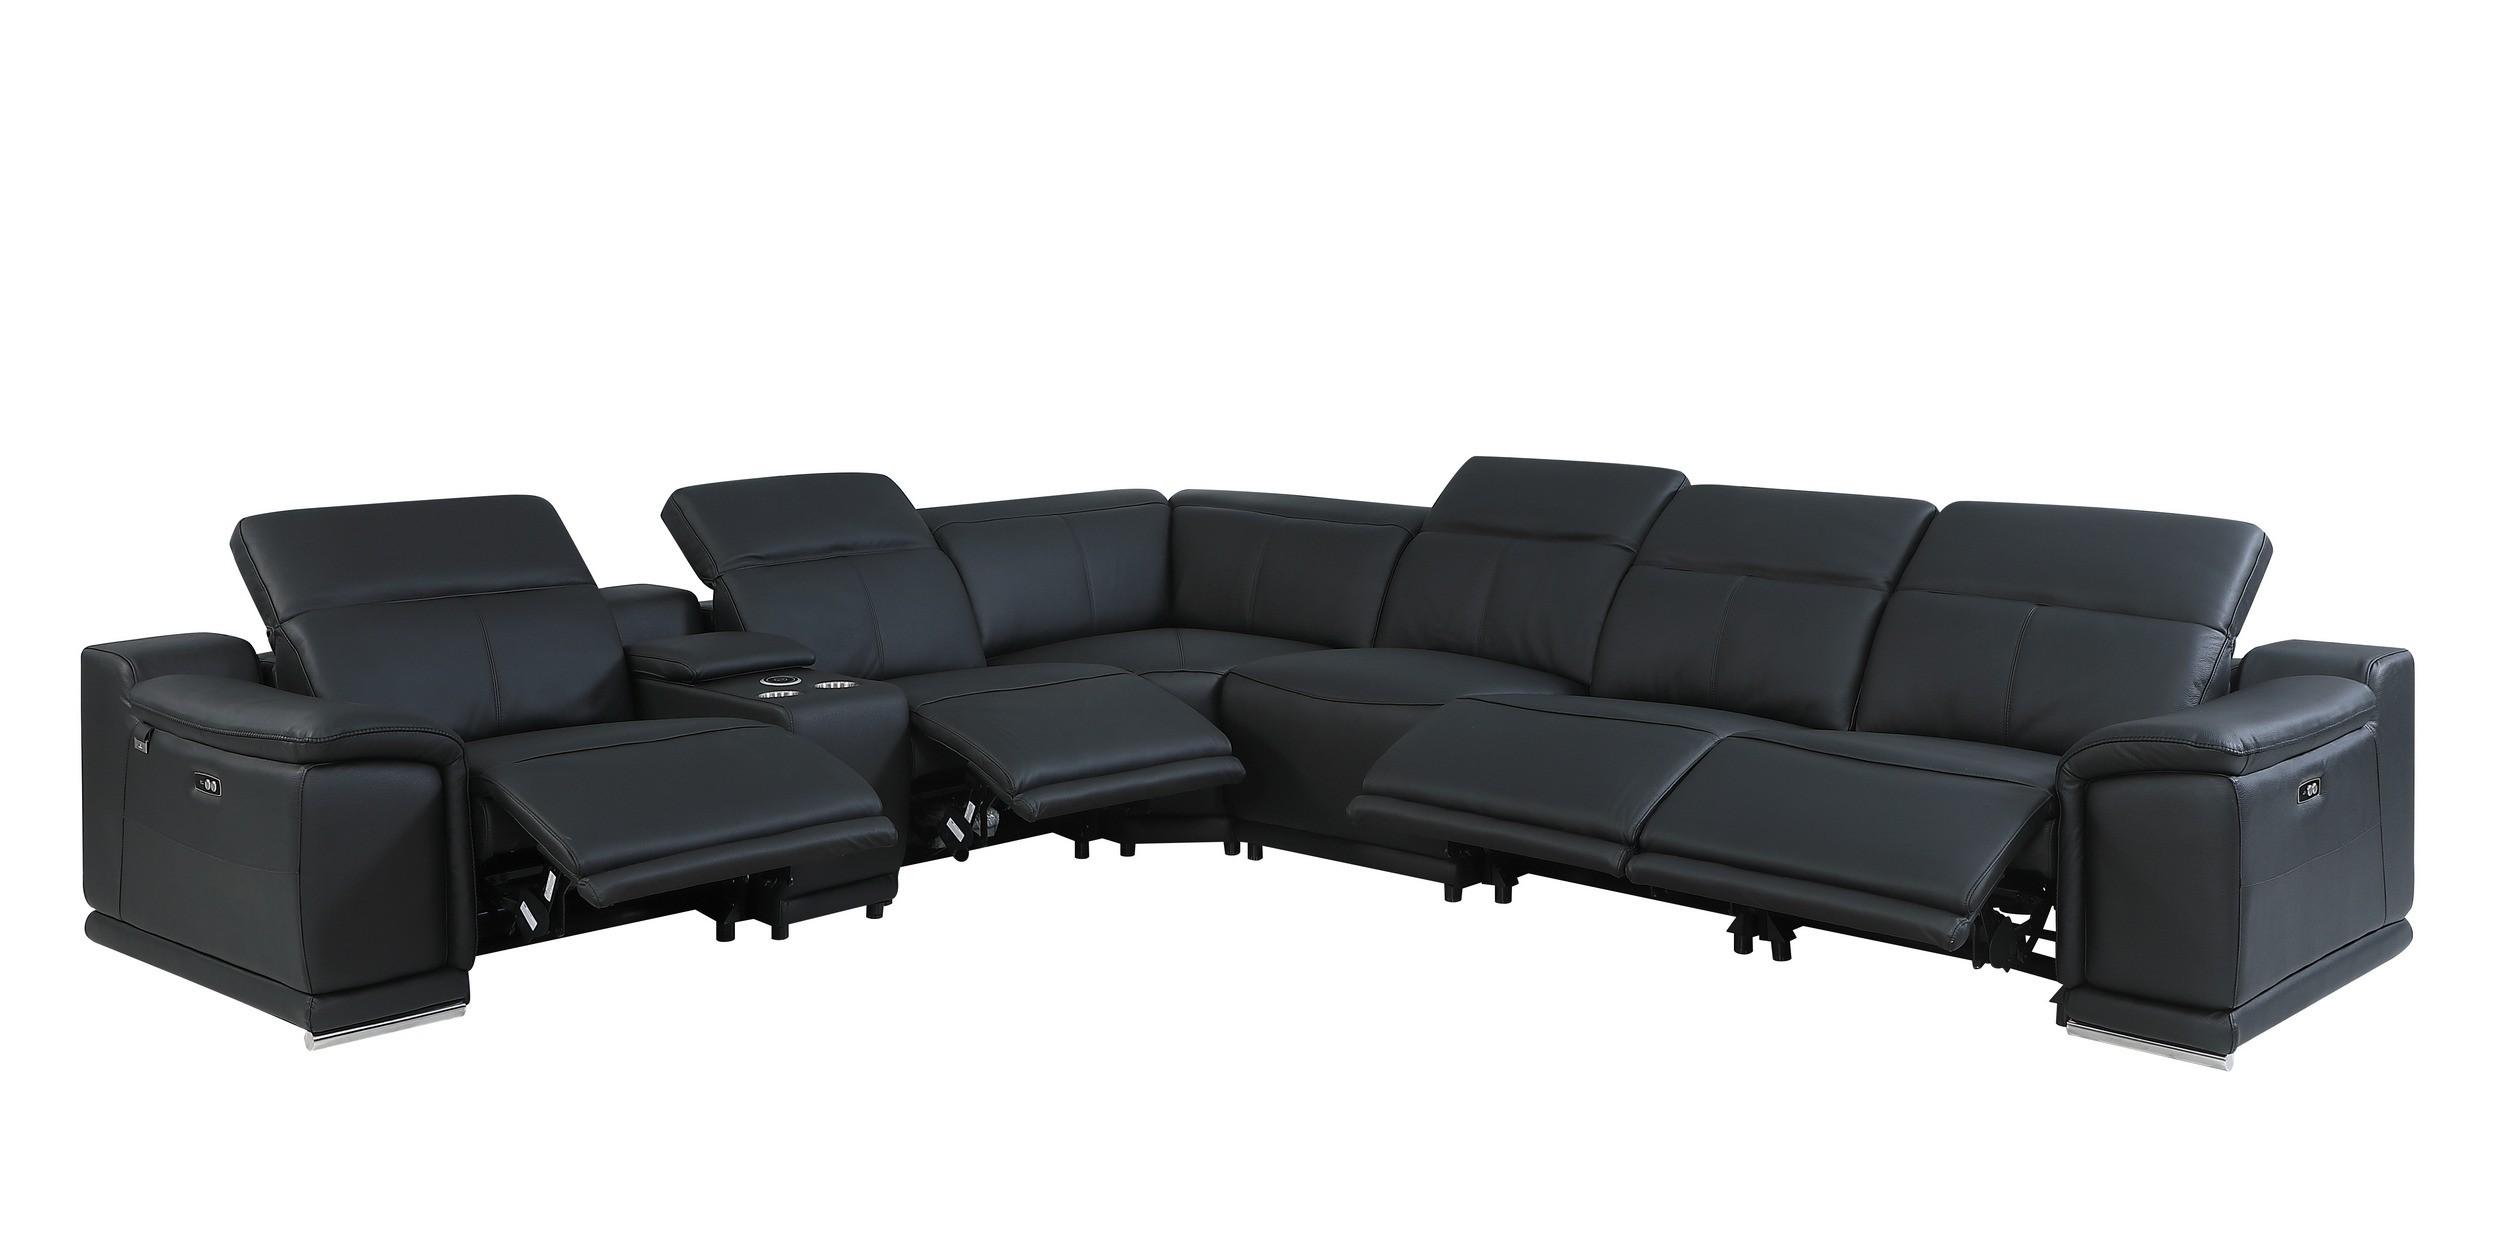 

    
BLACK 4-Power Reclining 7PC Sectional w/ 1-Console 9762 Global United
